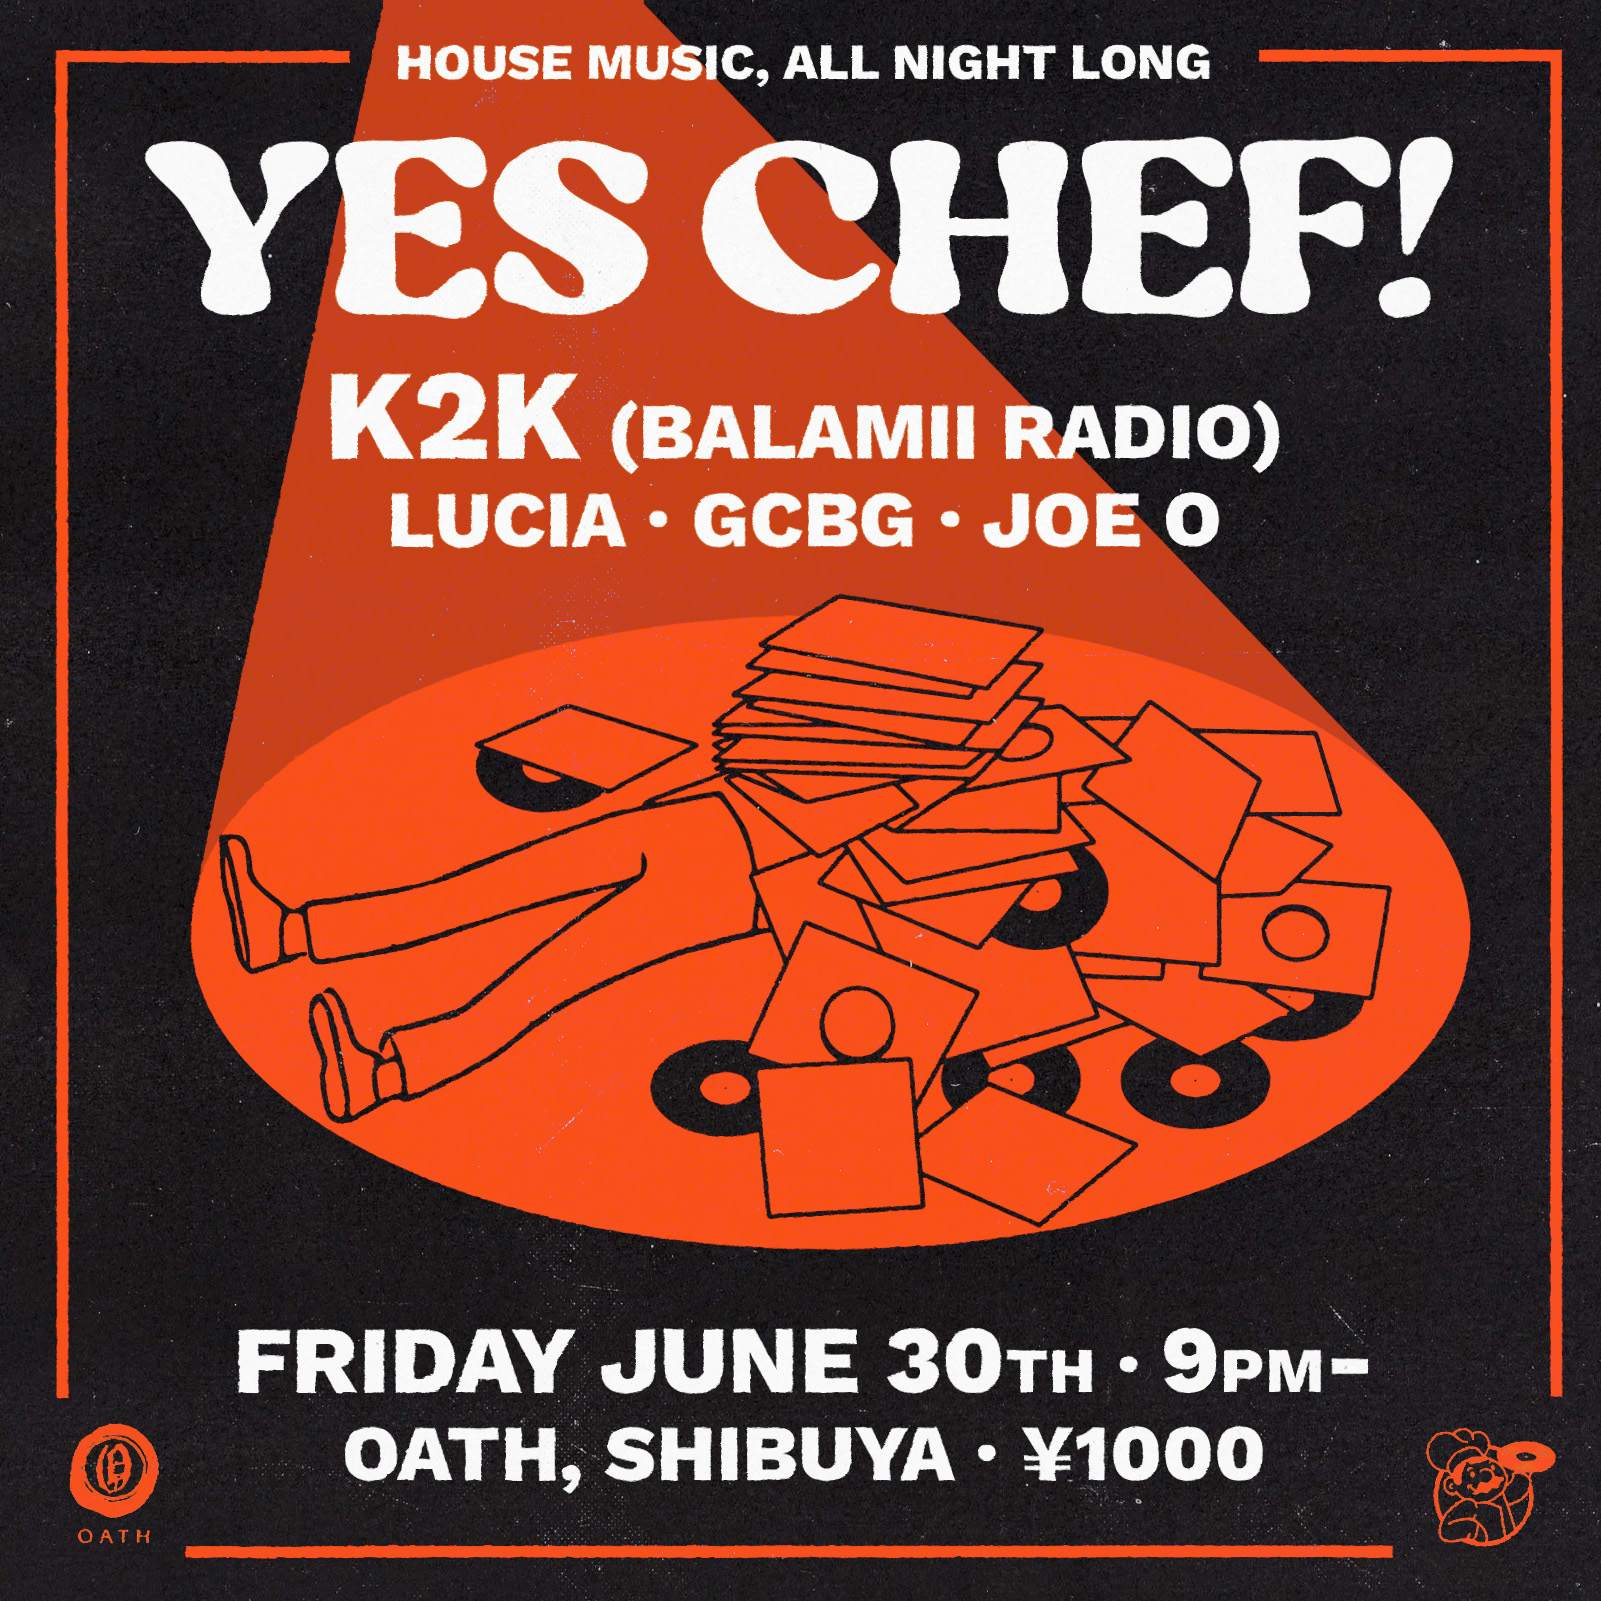 Yes Chef! - House Music All Night Long - フライヤー表